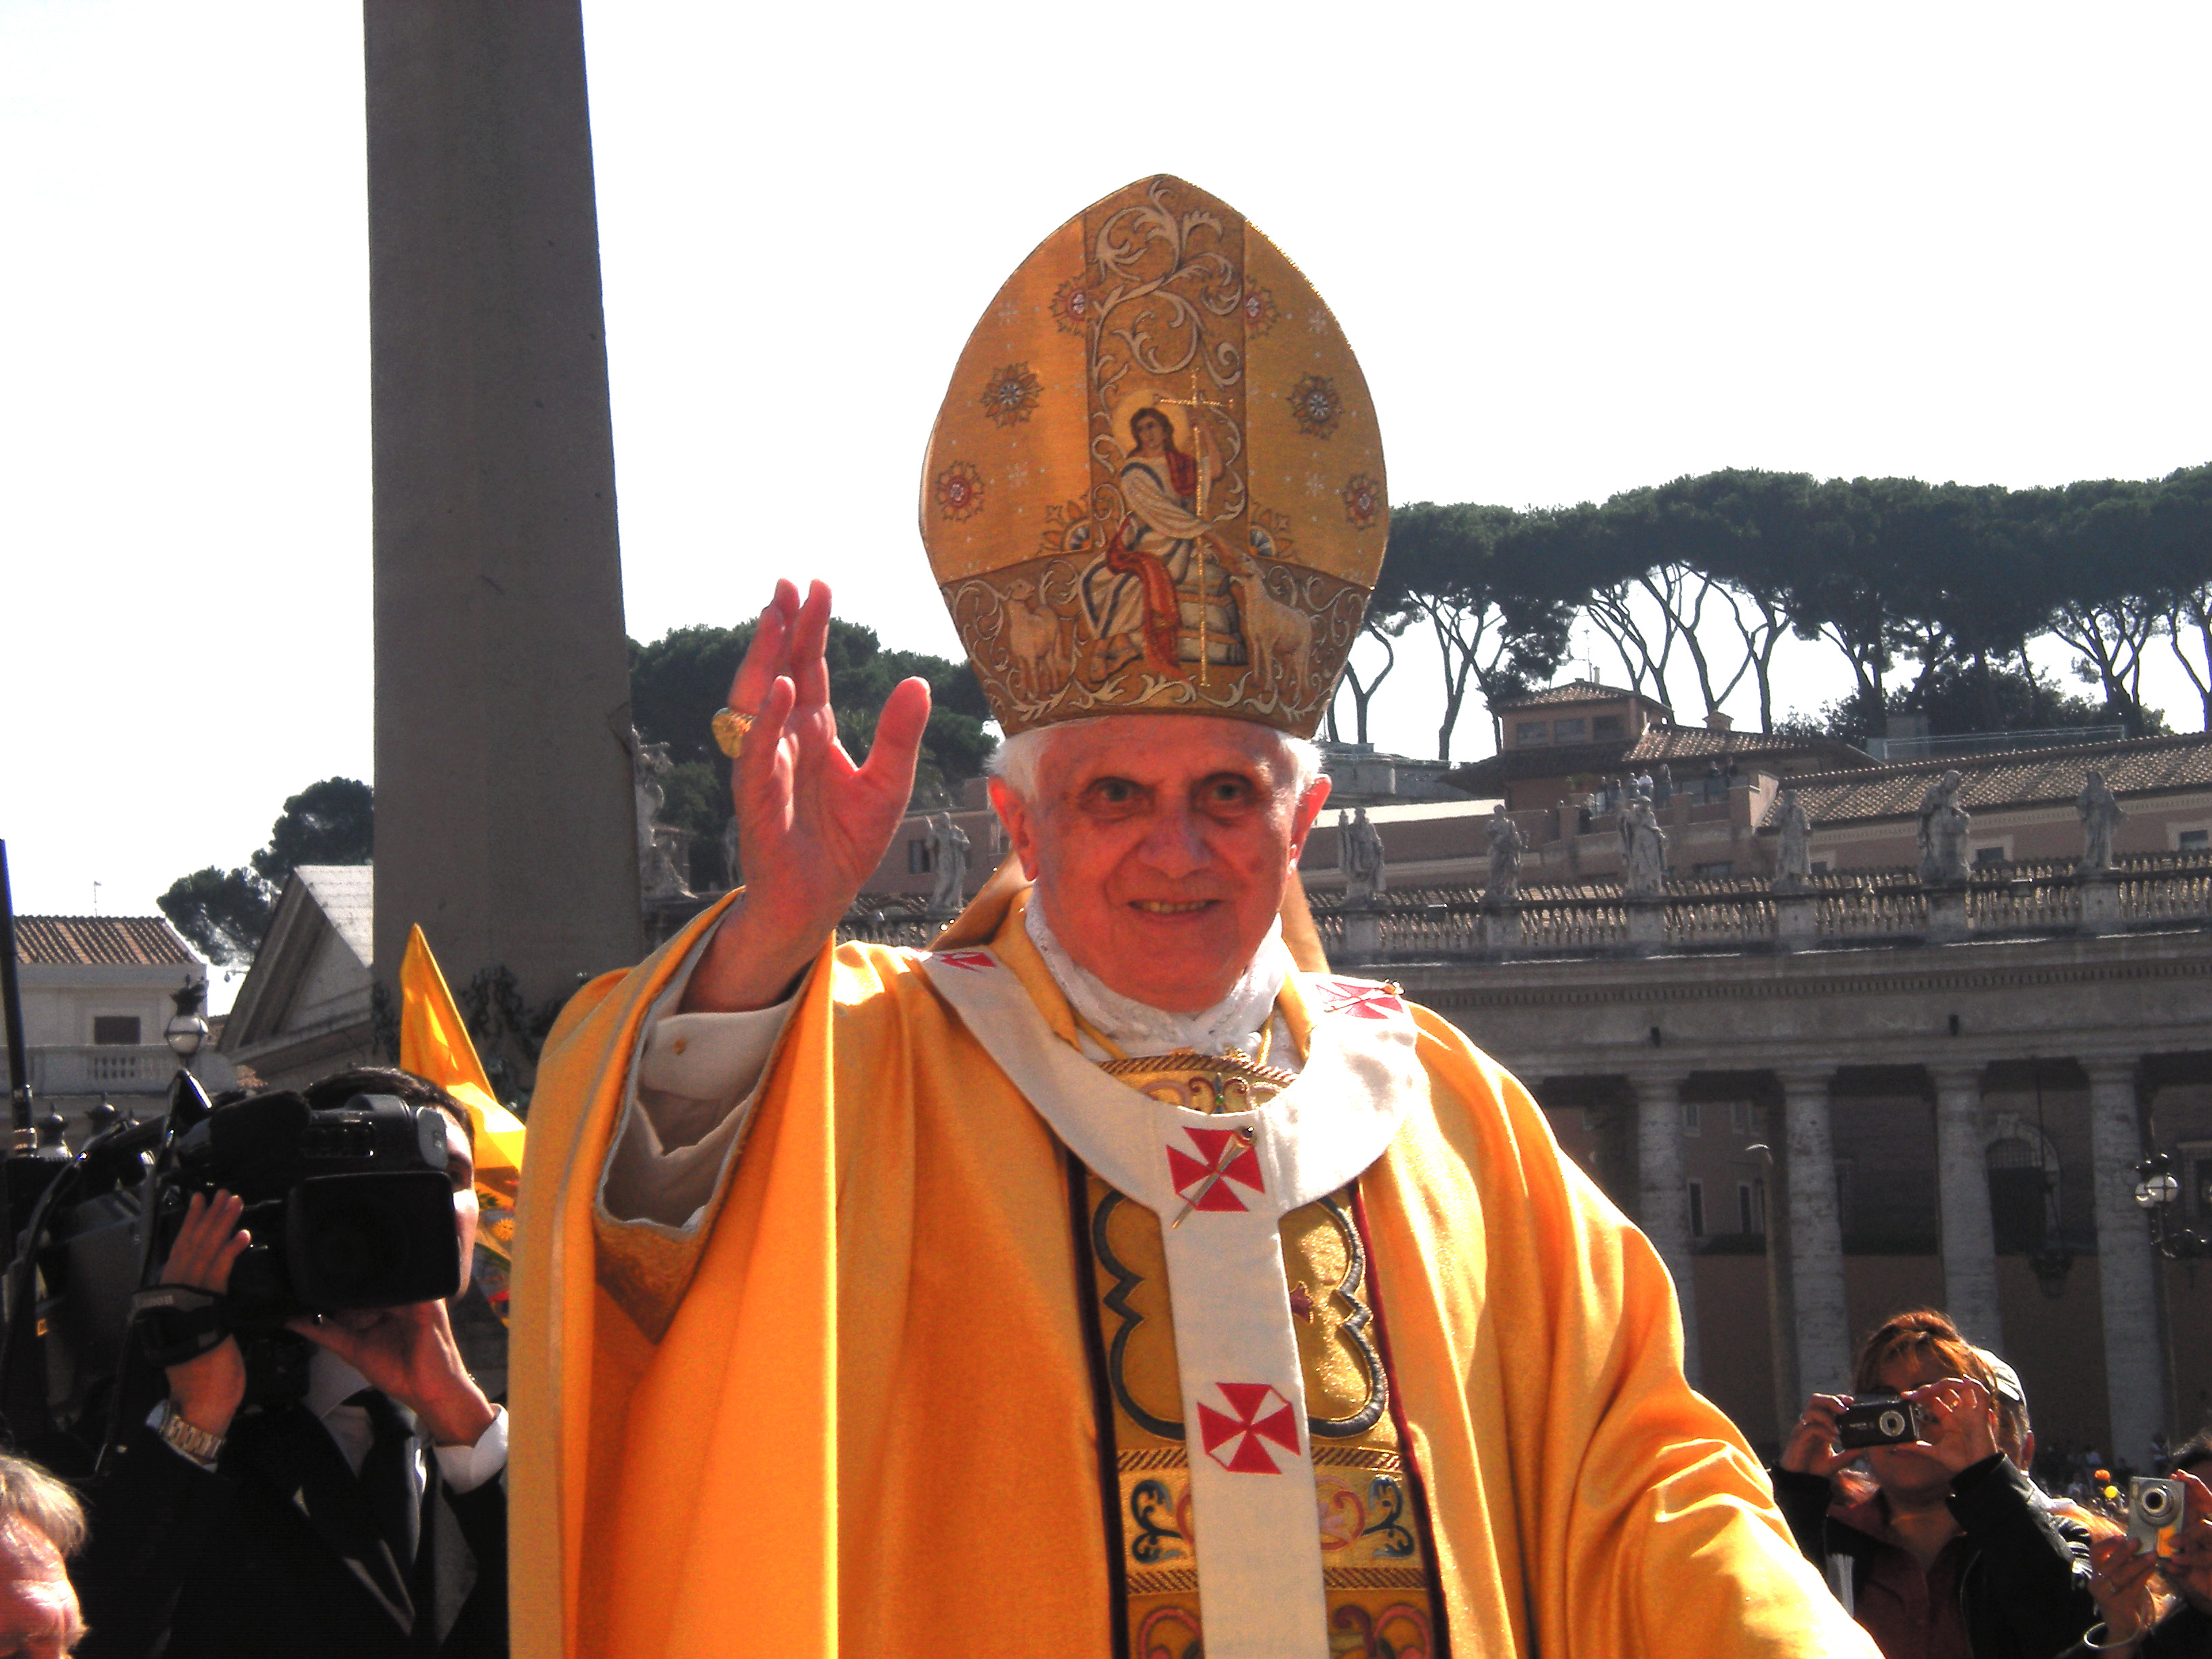 Pope Benedict XVI performing a blessing during the canonization mass in St. Peter's Square in Rome, Italy on Sunday October 12, 2008